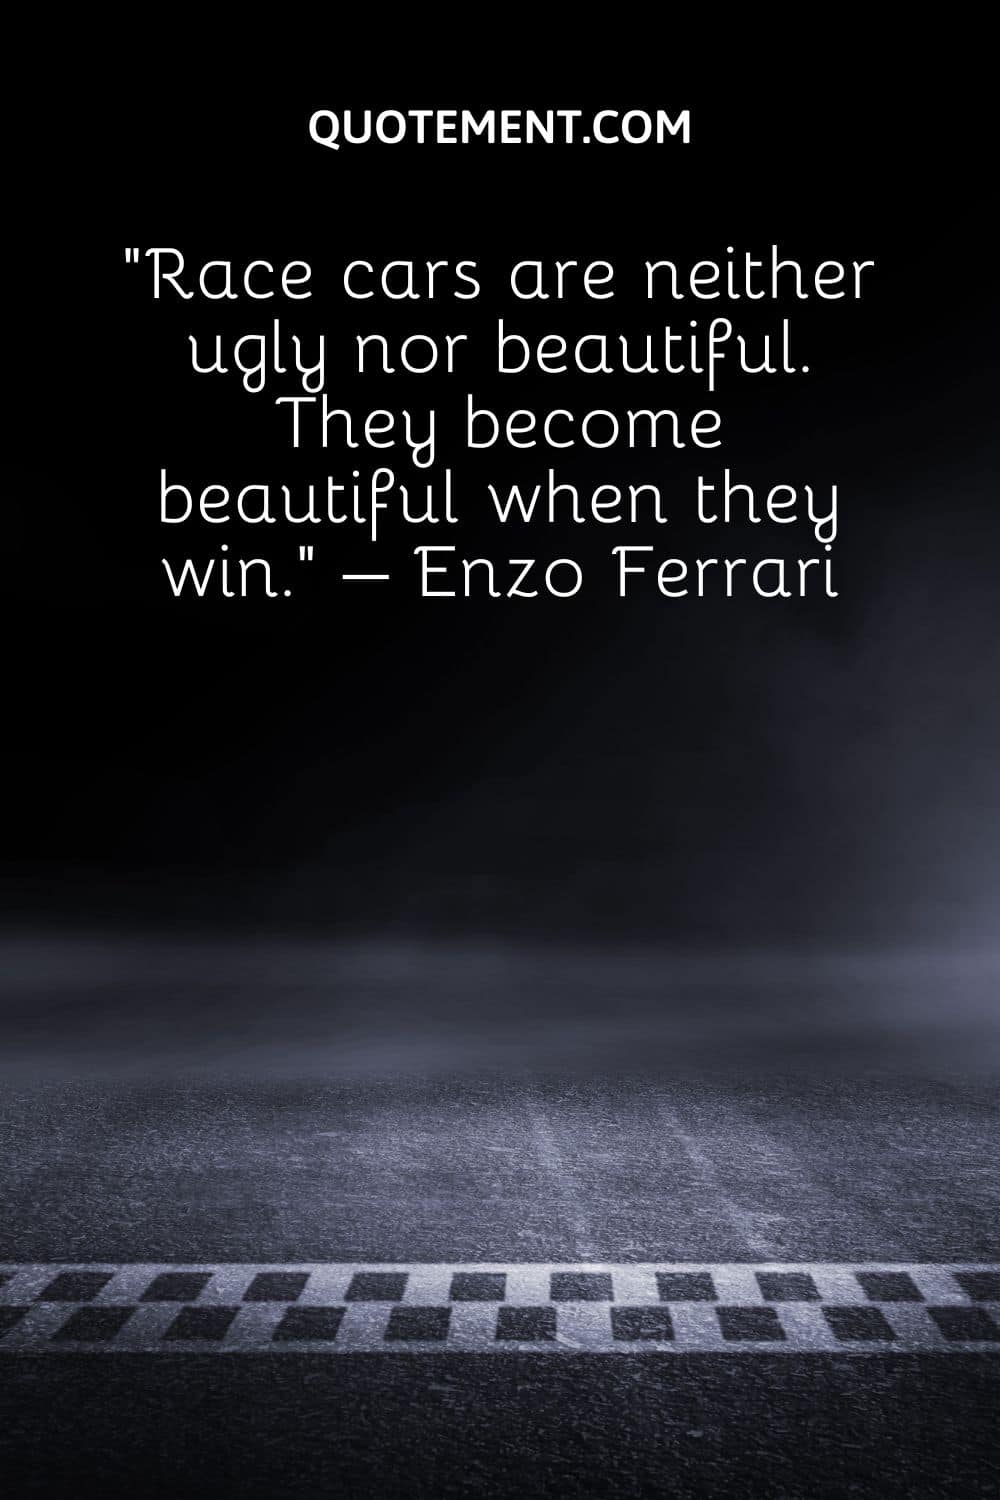 Race cars are neither ugly nor beautiful